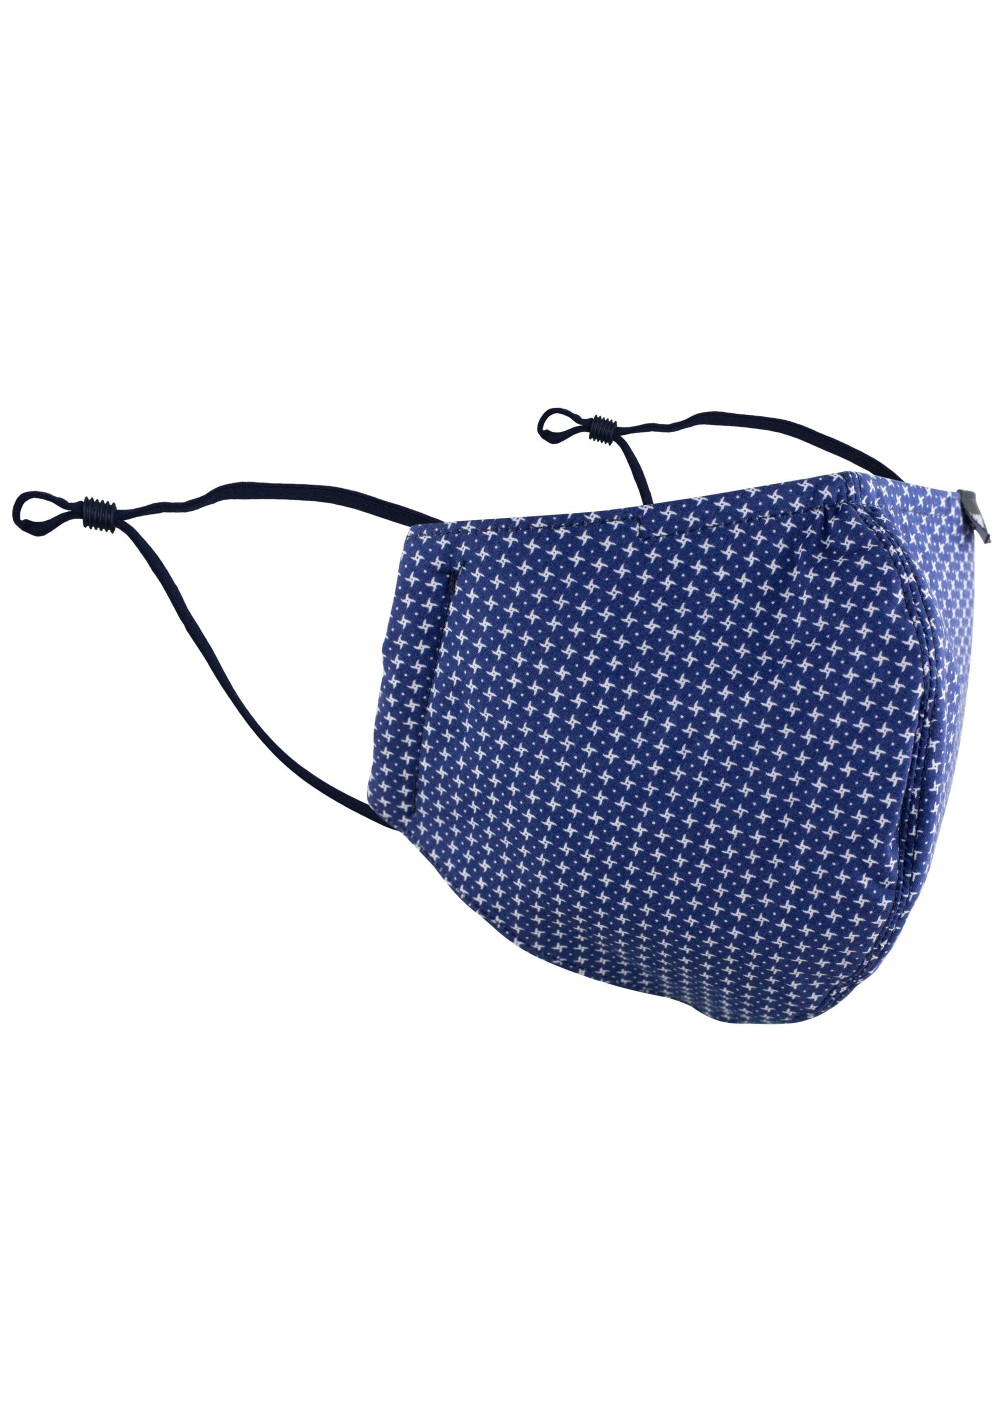 designer fabric face masks by BYOM in navy with star print